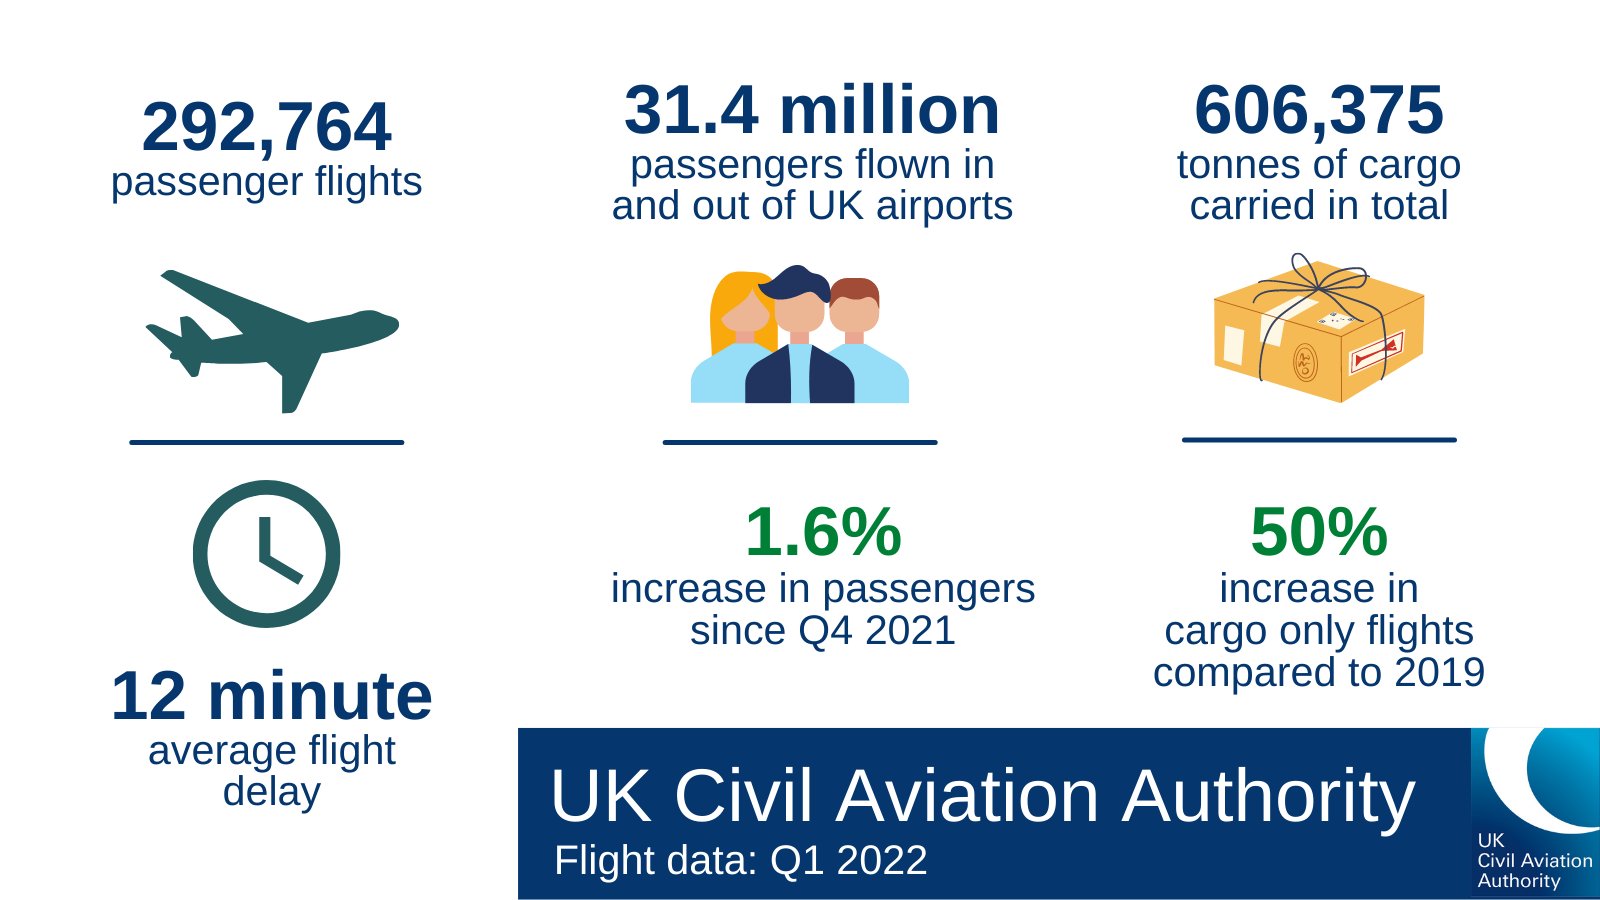 UK-CAA  :  At 31.4 million , UK  Airports  lost  42%  Passengers  in  the 1st  Quarter  compared  to  same period  in  2019  !